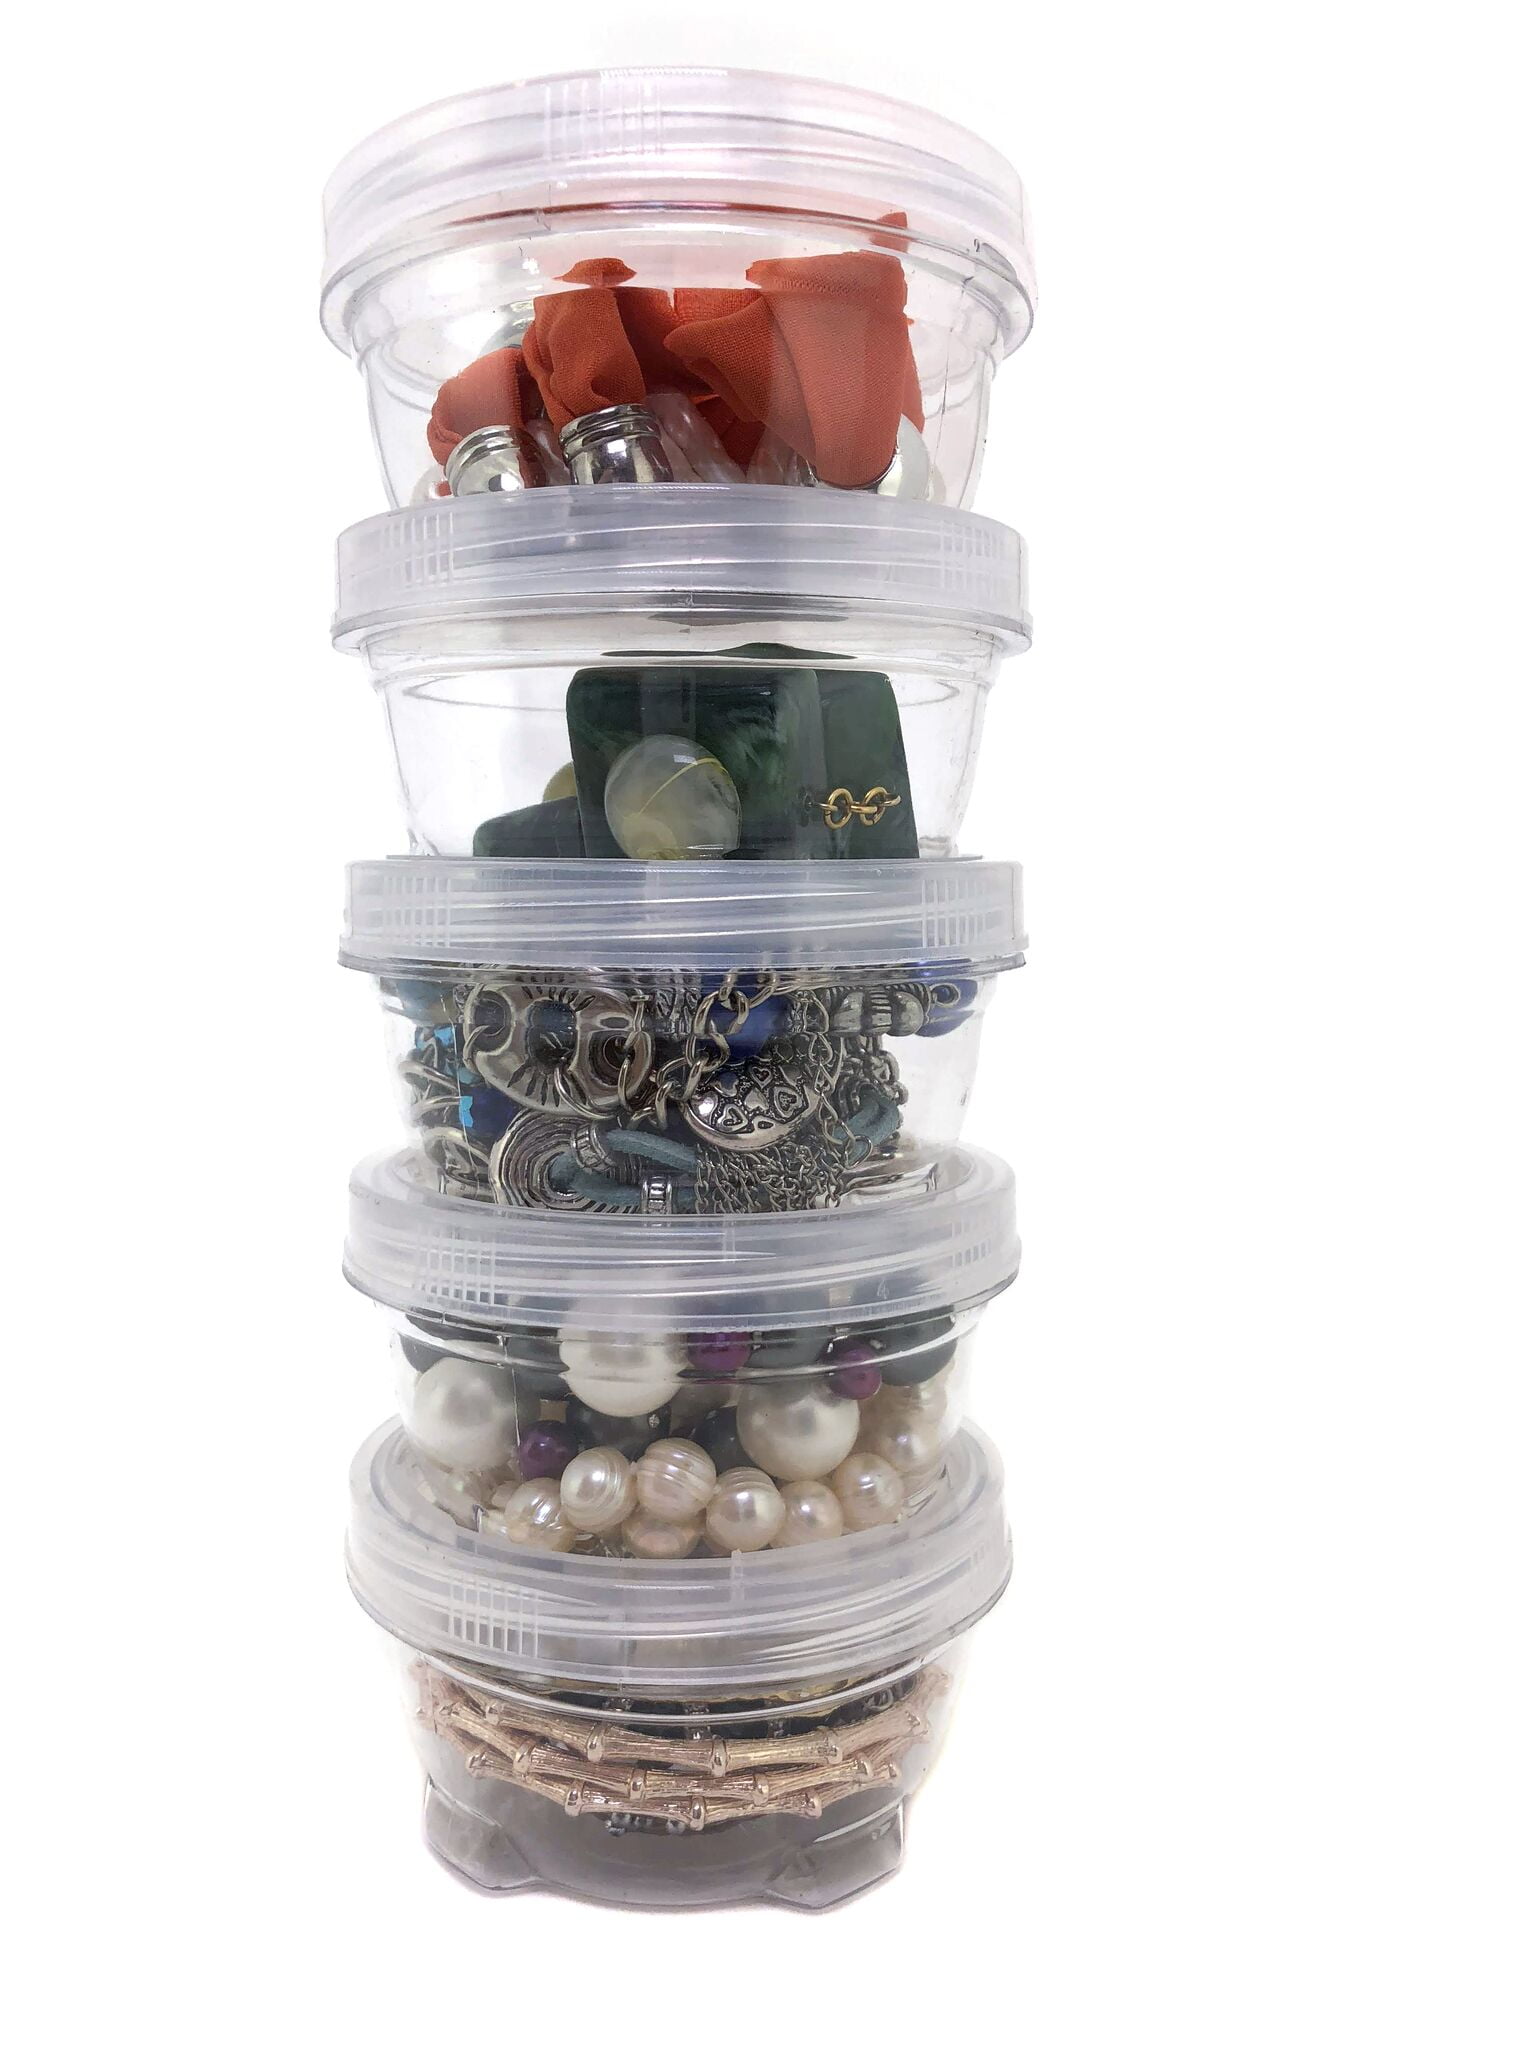 BeneLabel Stackable Food Storage Containers with Twist Lock System